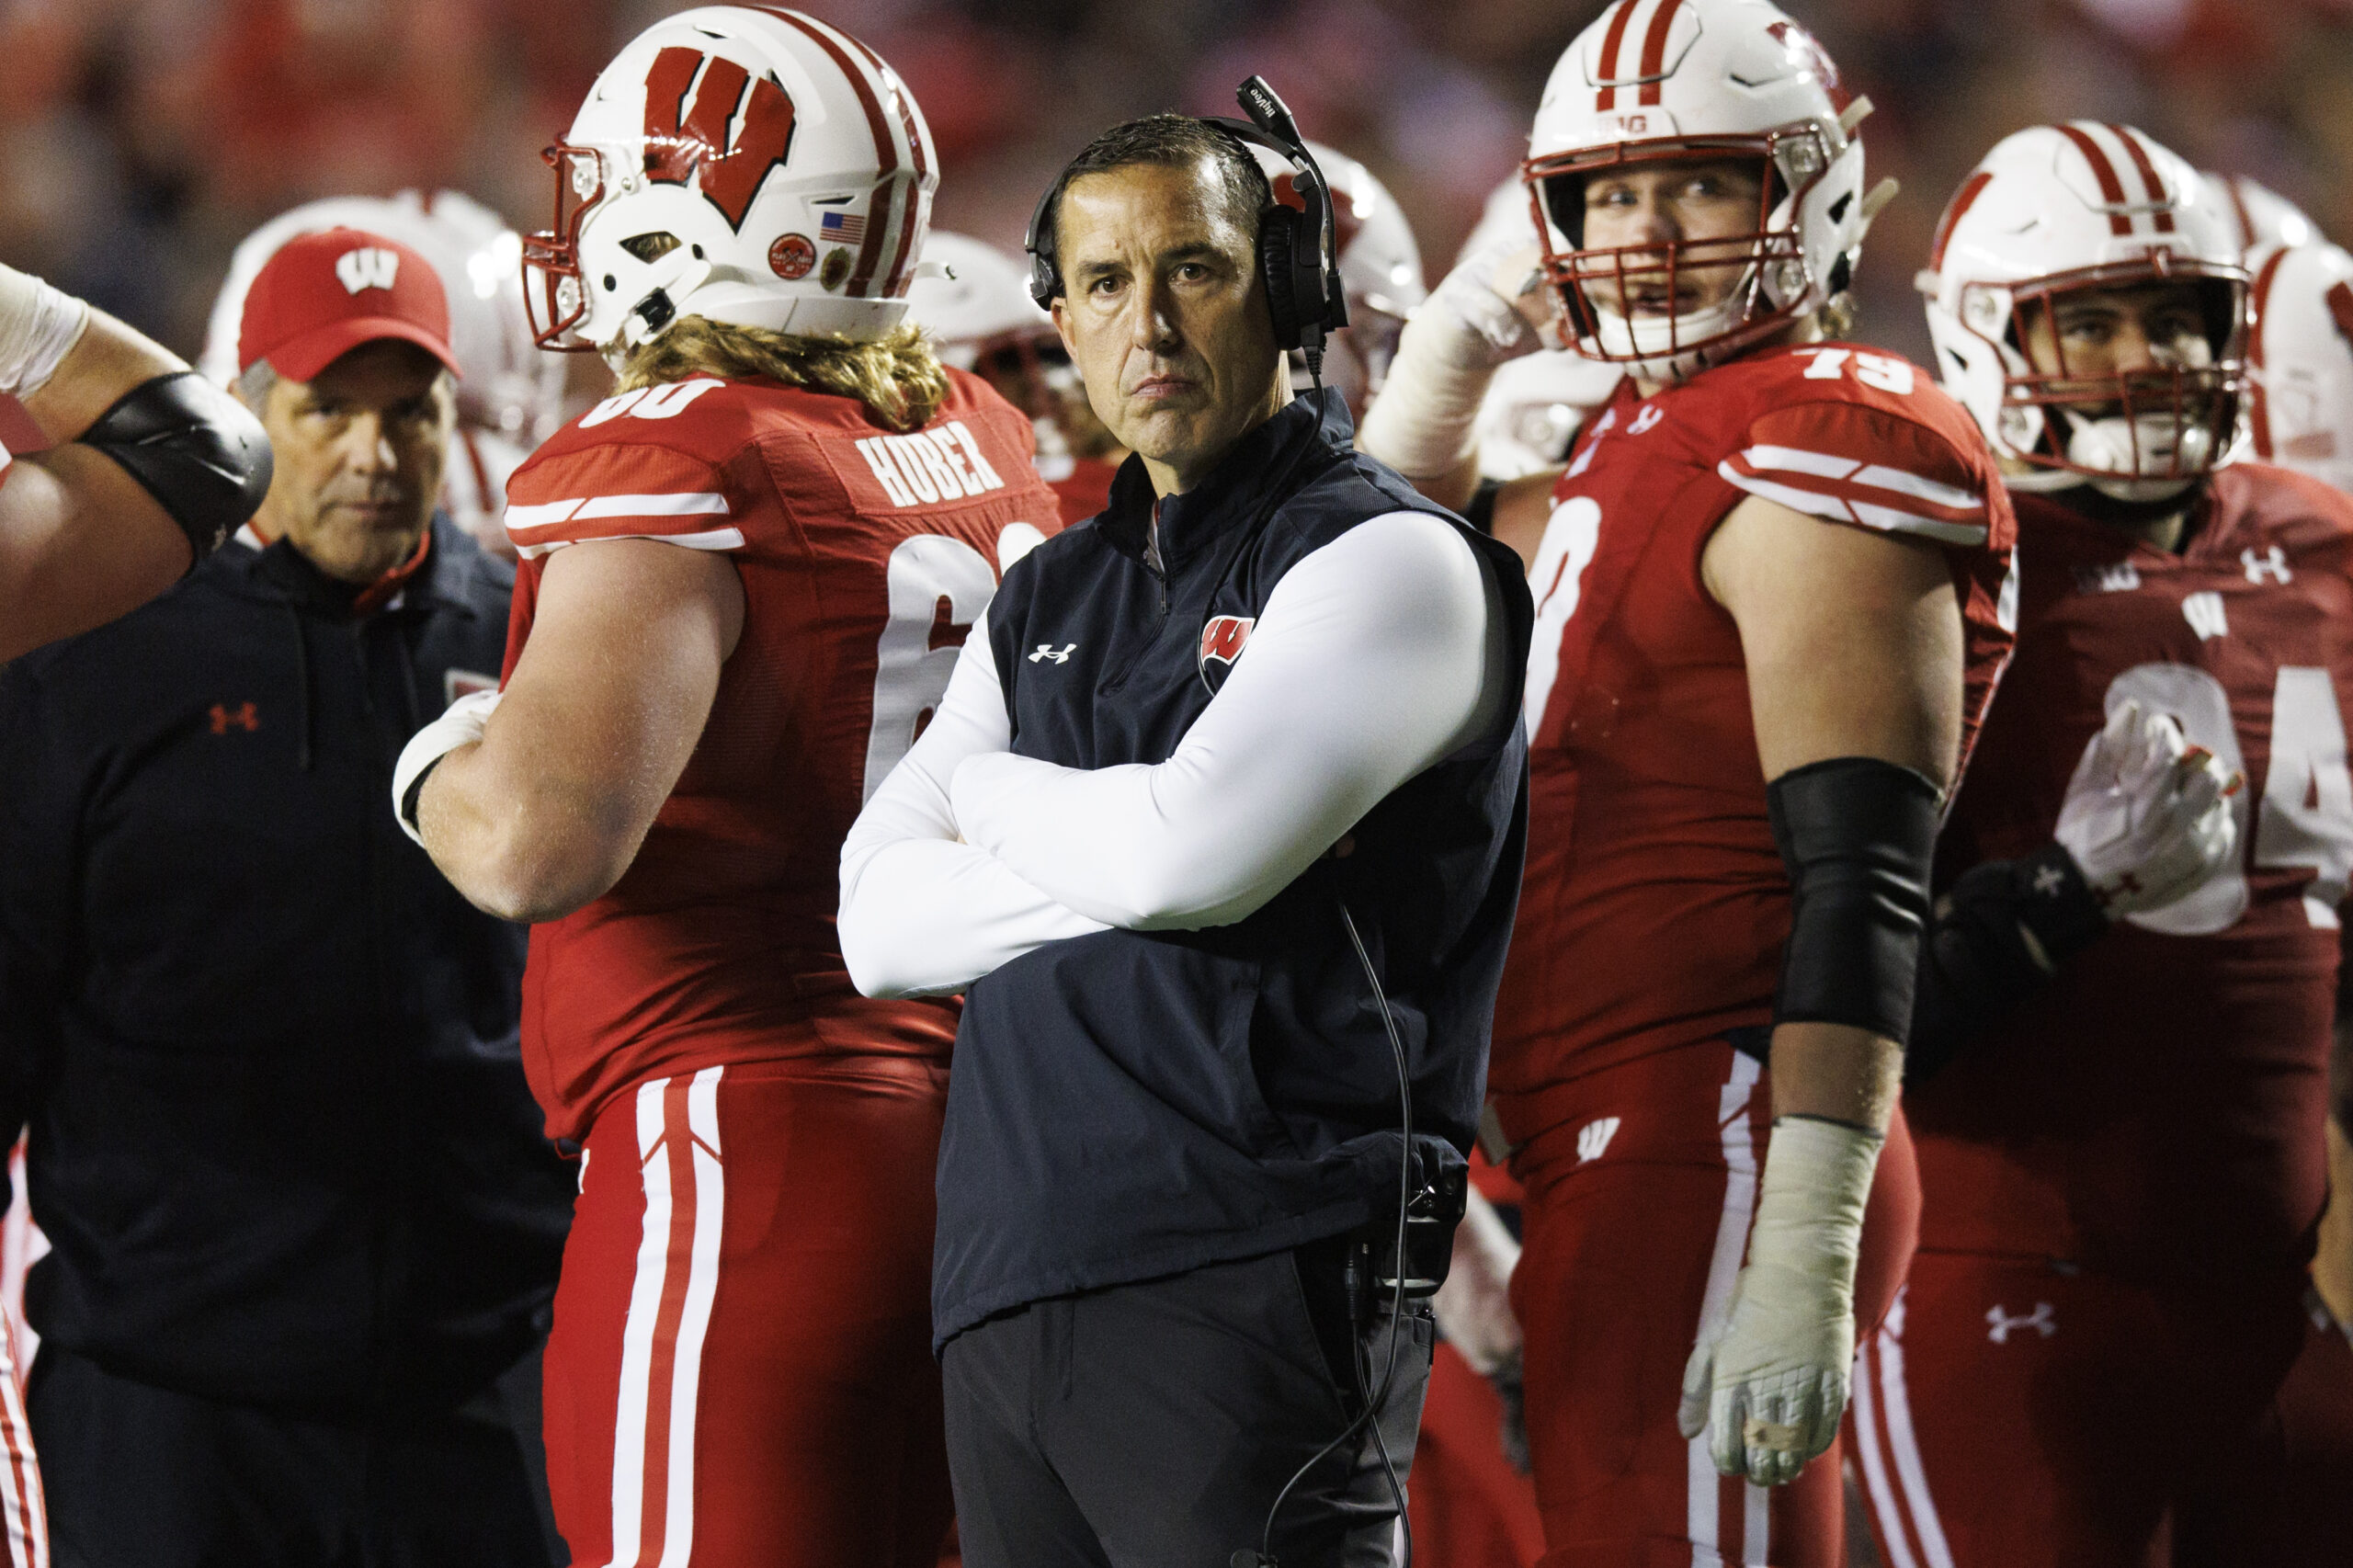 Wisconsin looking to take next step in early Big Ten football power rankings reveal